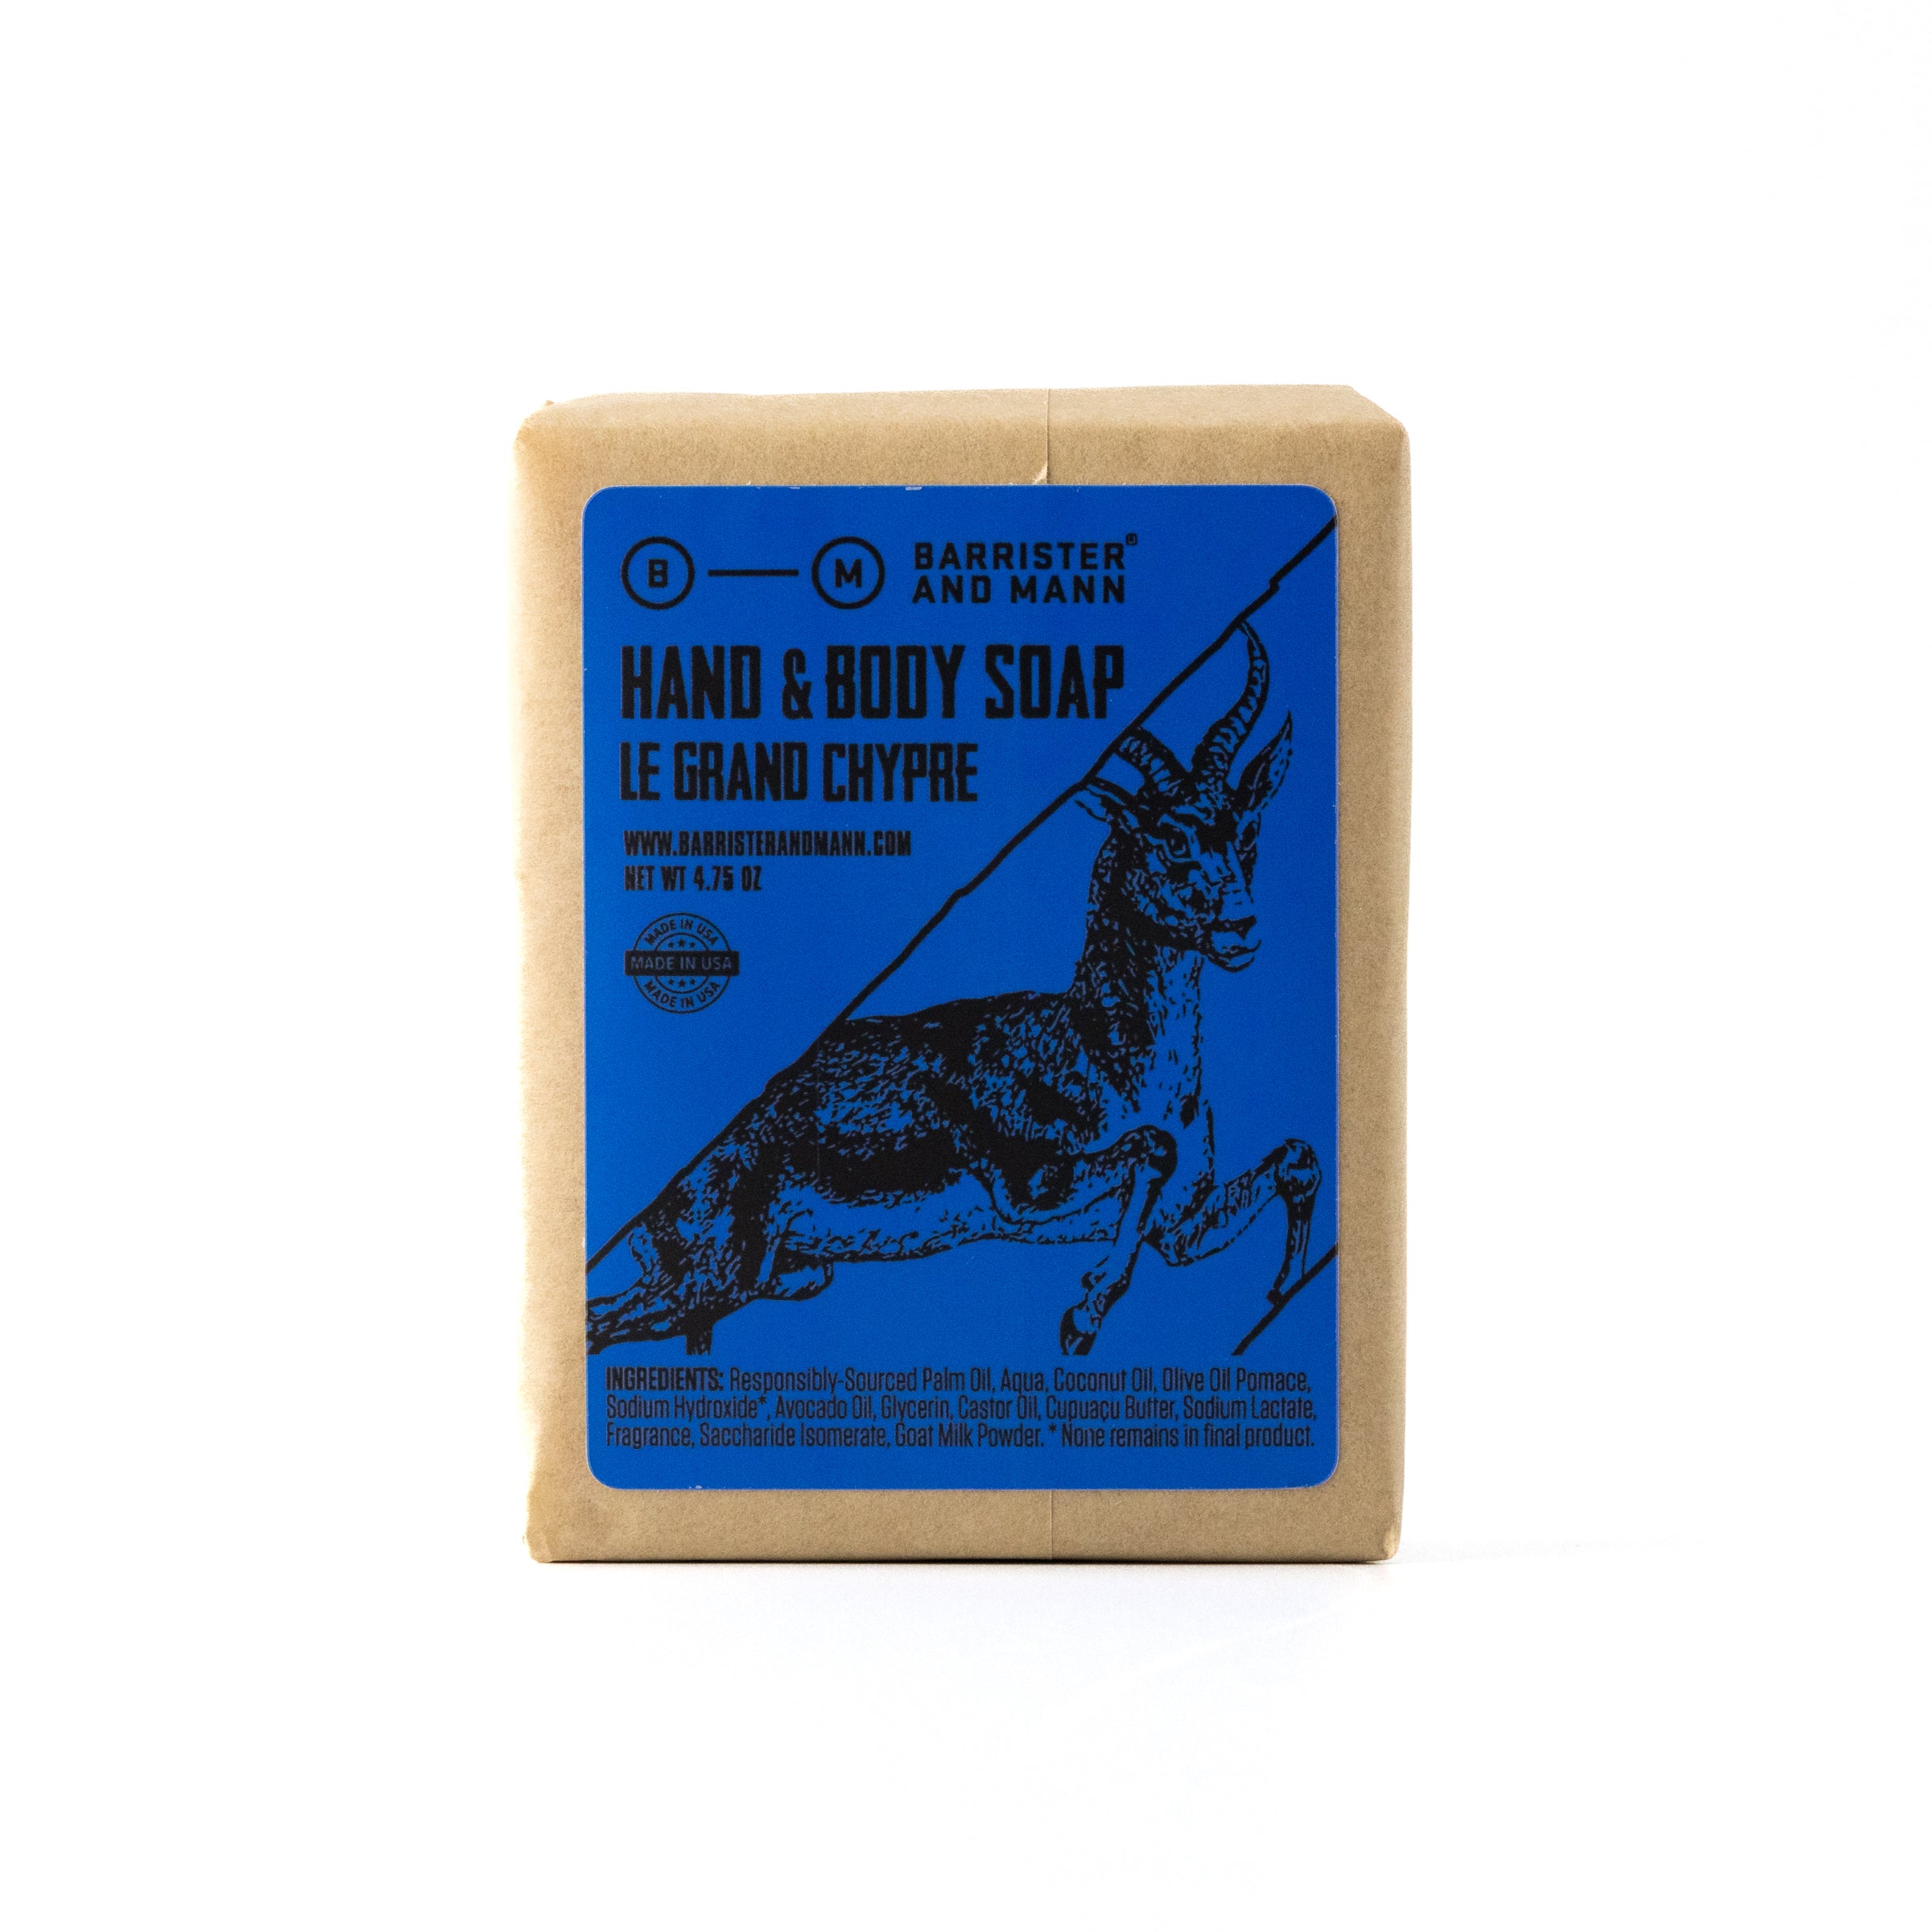 Hand & Body Soap: Le Grand Chypre - Barrister and Mann LLC